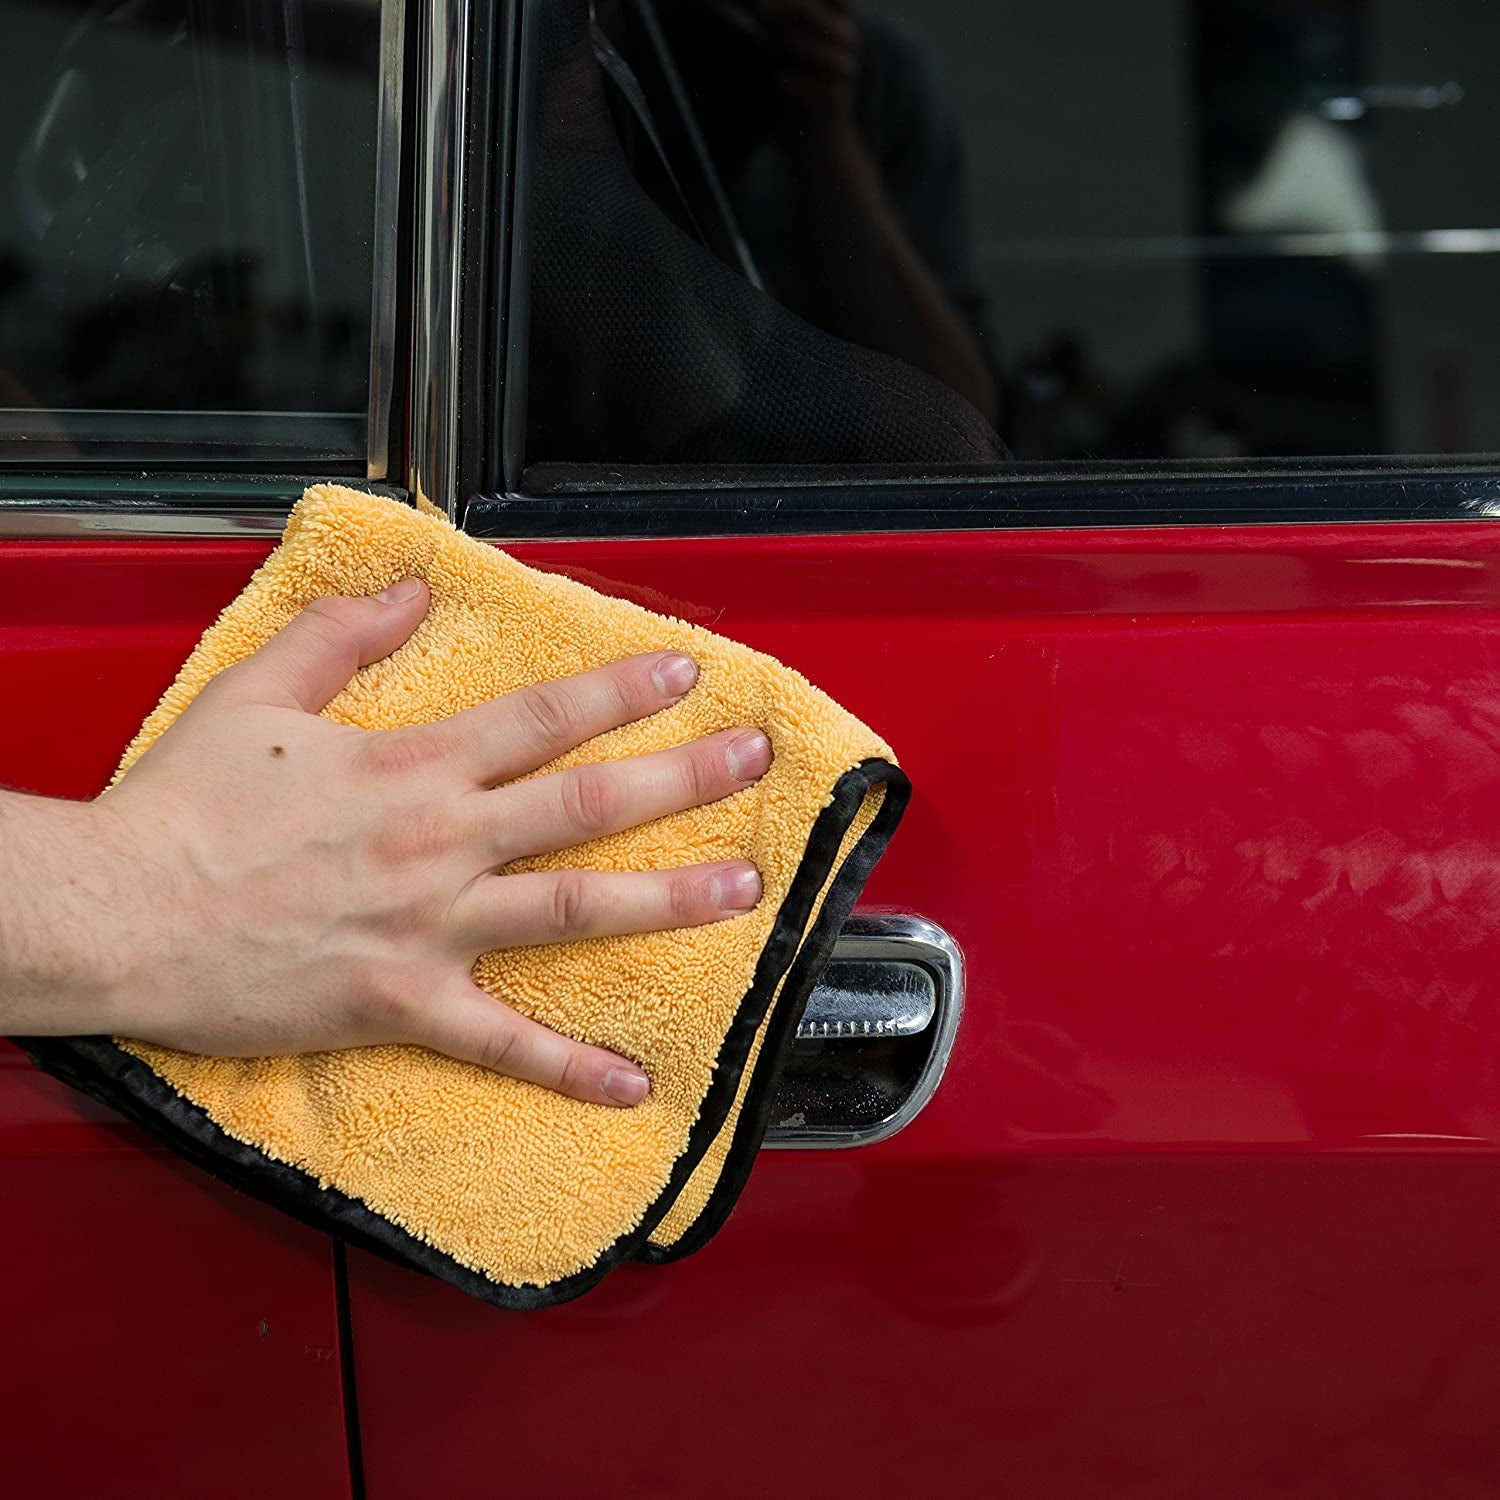 Does Your Car Wash Towel Leave Streaks?